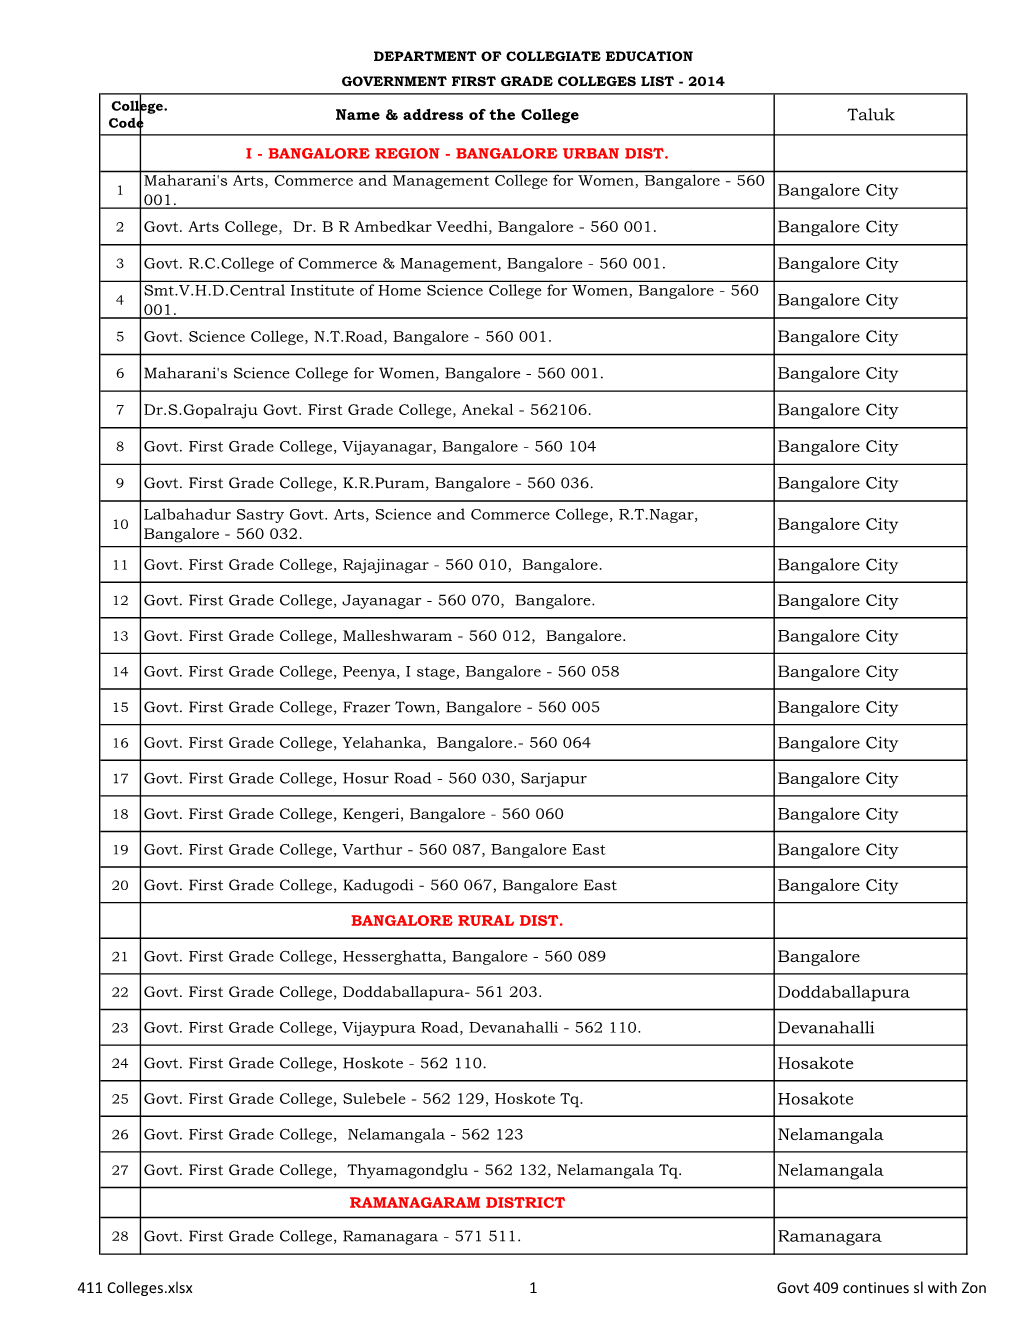 Department of Collegiate Education Government First Grade Colleges List - 2014